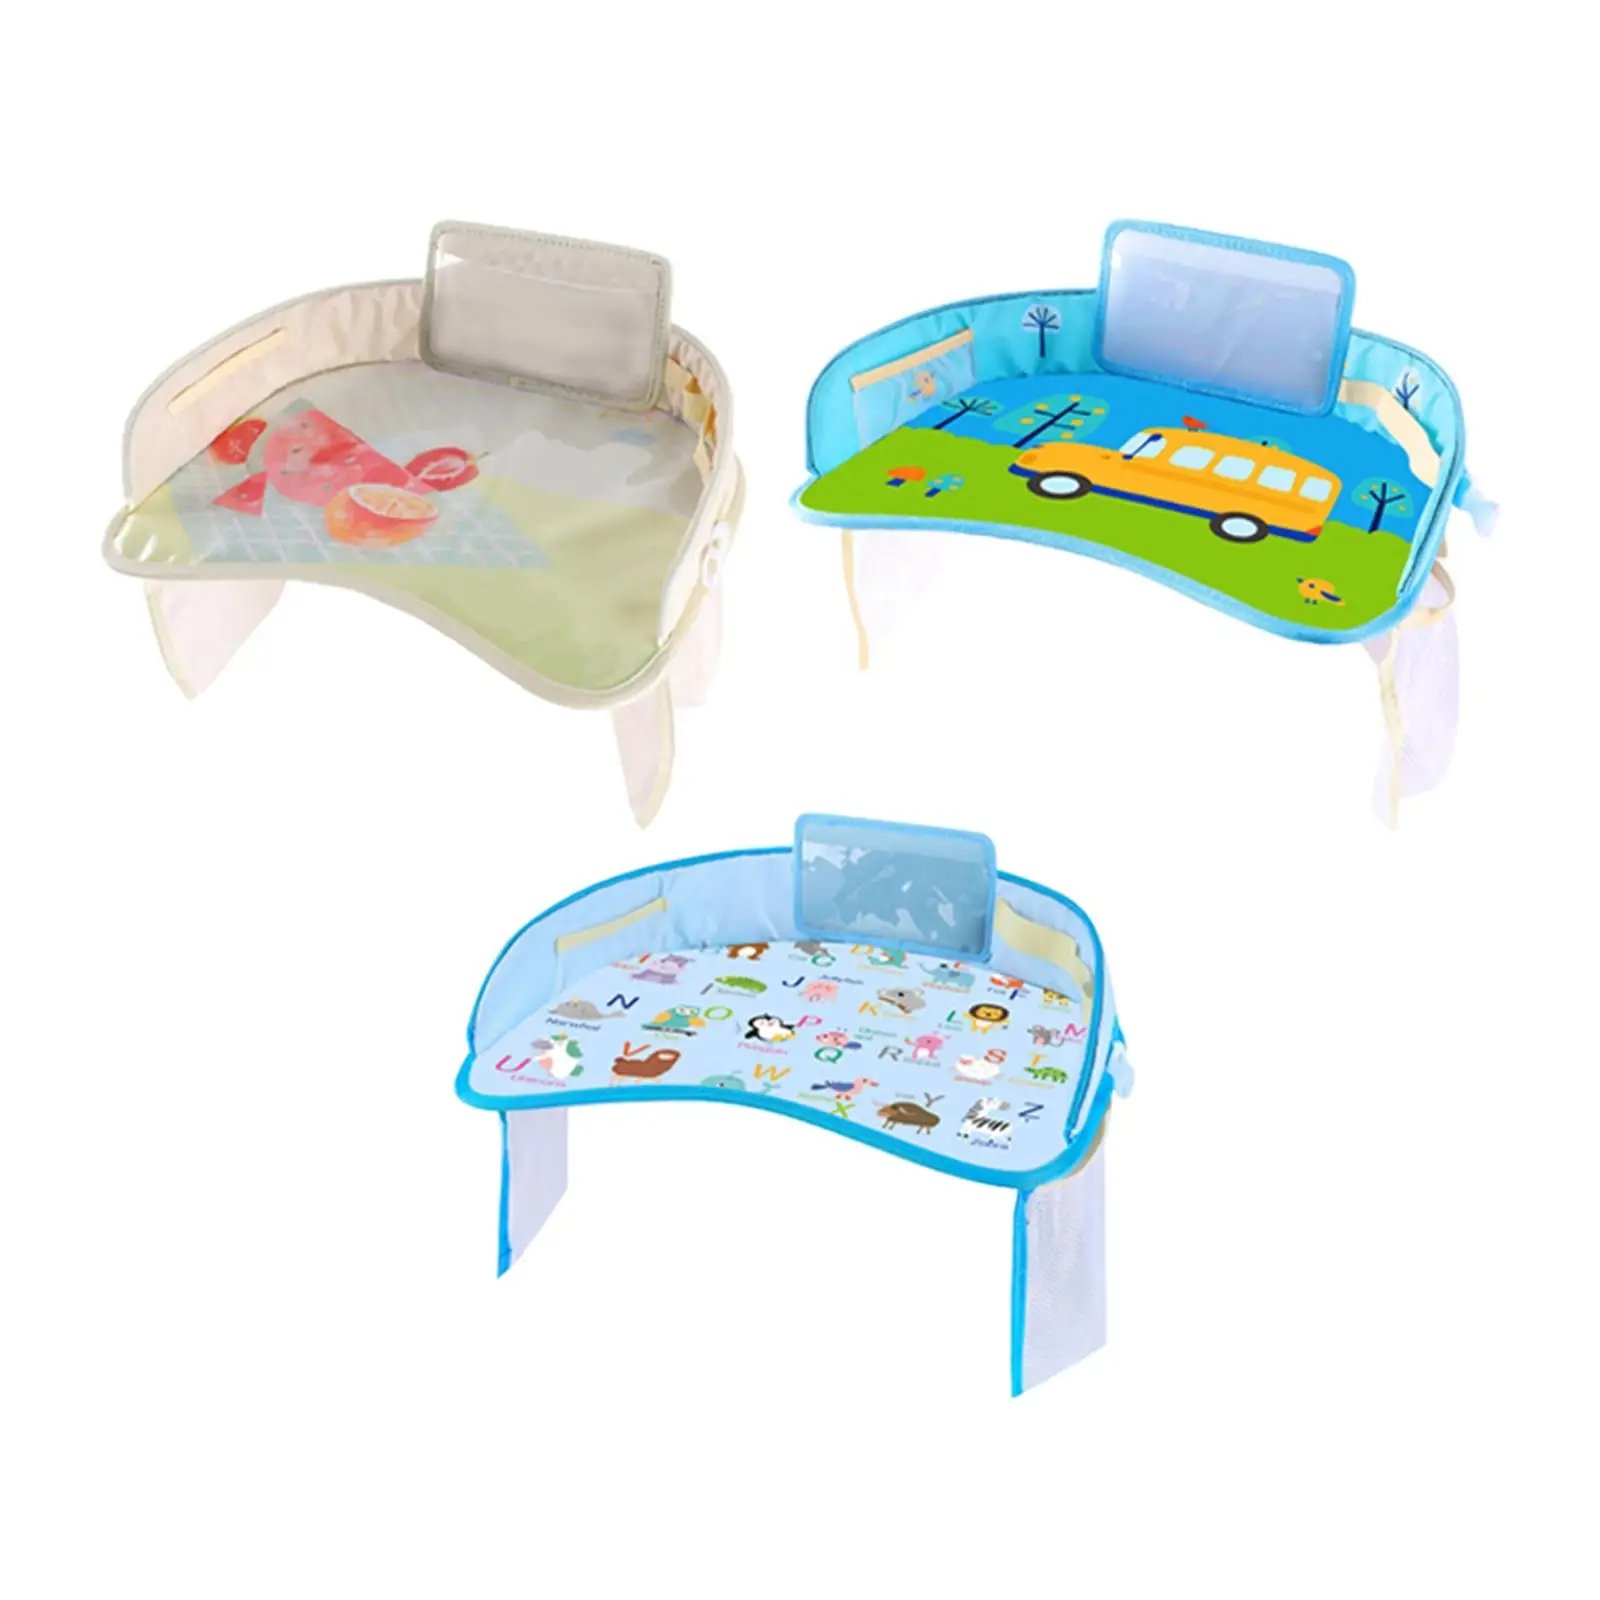 

Toddler Lap Desk Organizer Eating Drawing Snack Activity Tray Car Seat Play Table Waterproof Kids Travel Tray for Airplane Baby